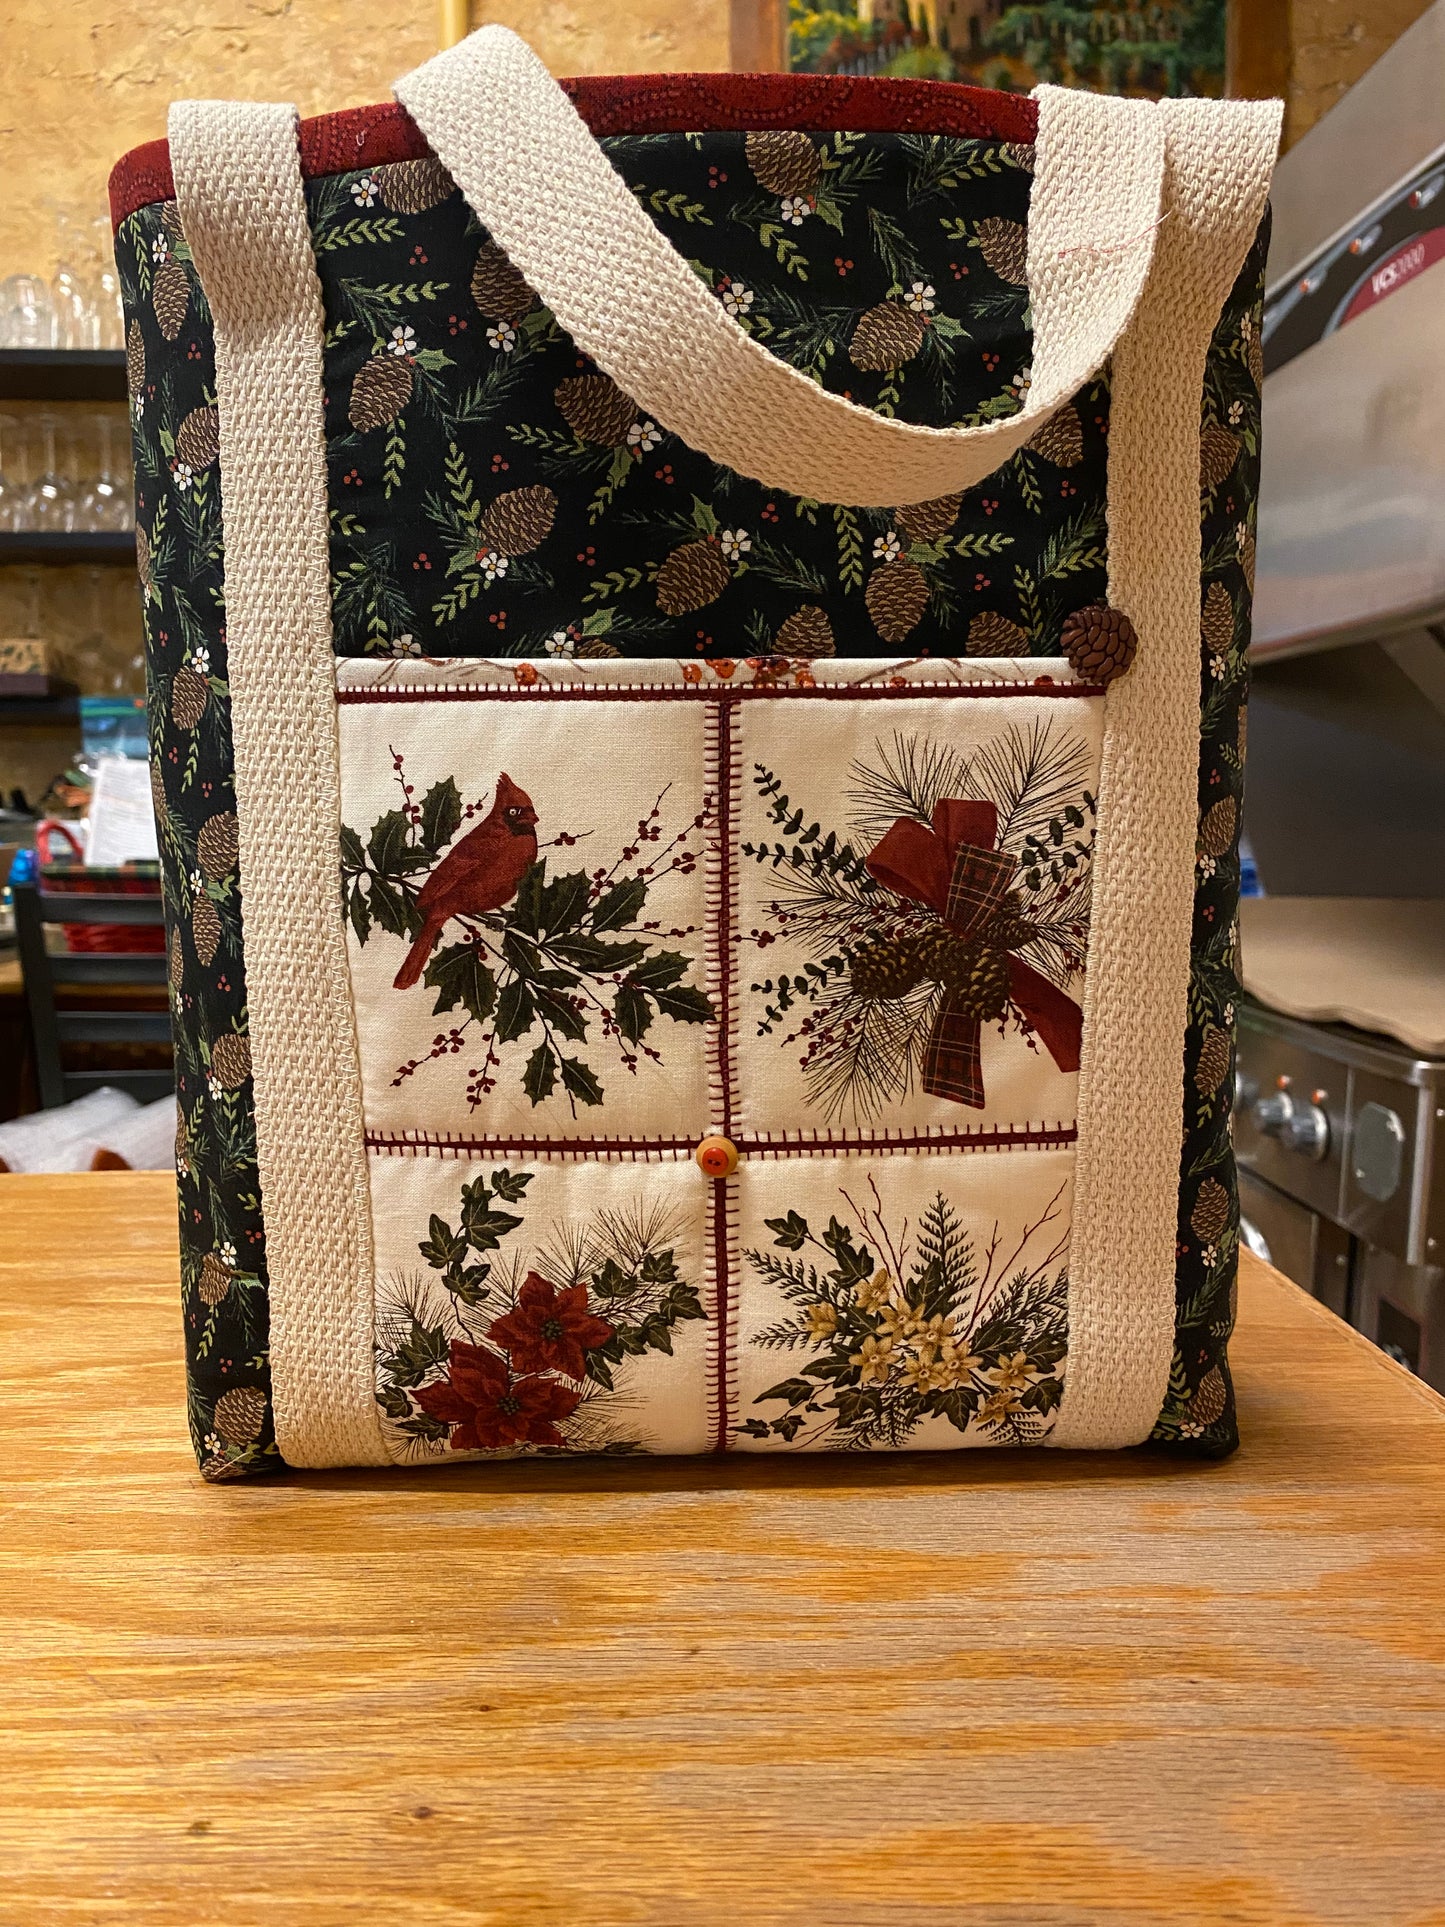 Hand Made Market Bags